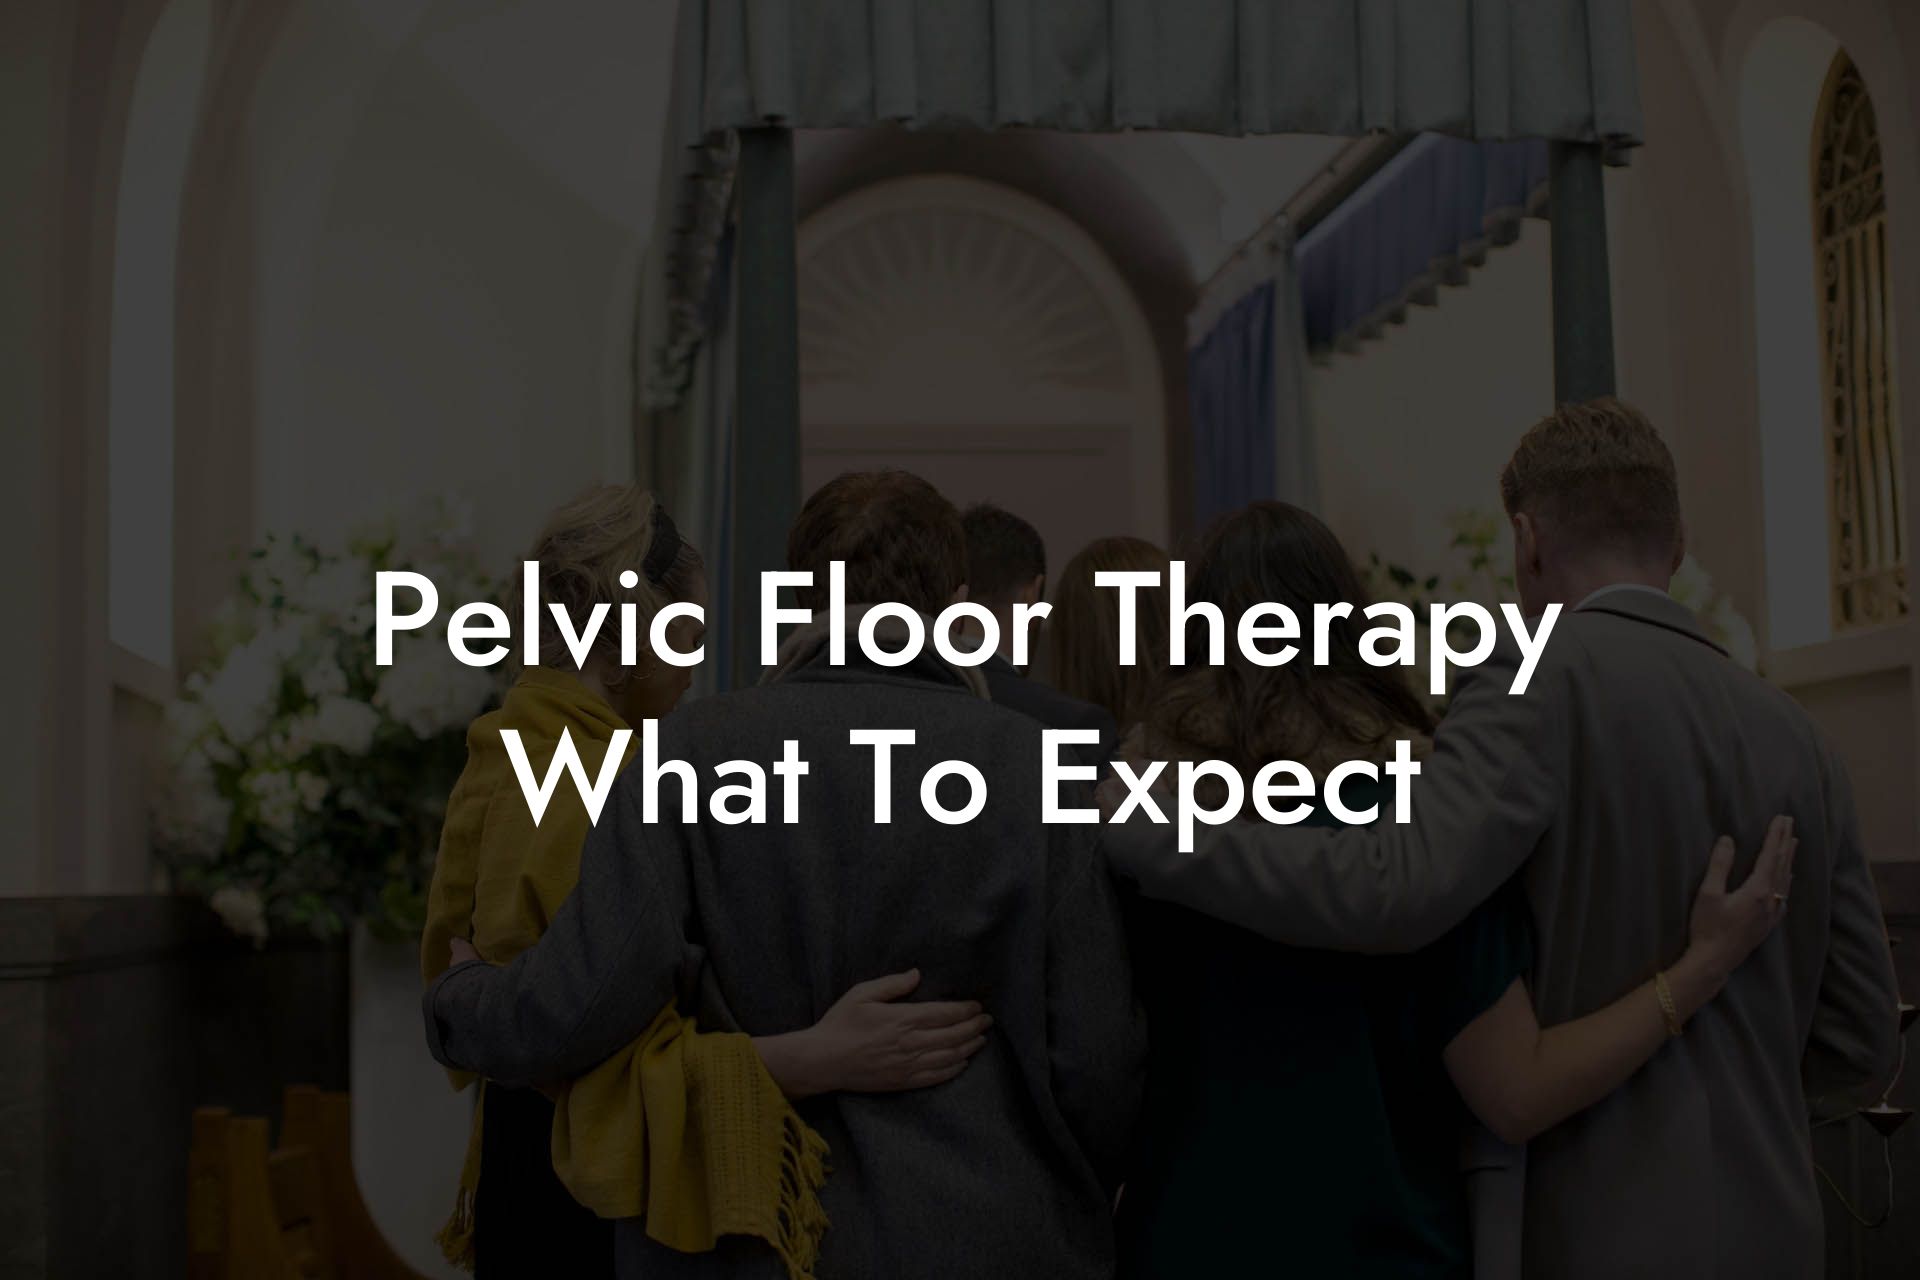 Pelvic Floor Therapy: What To Expect